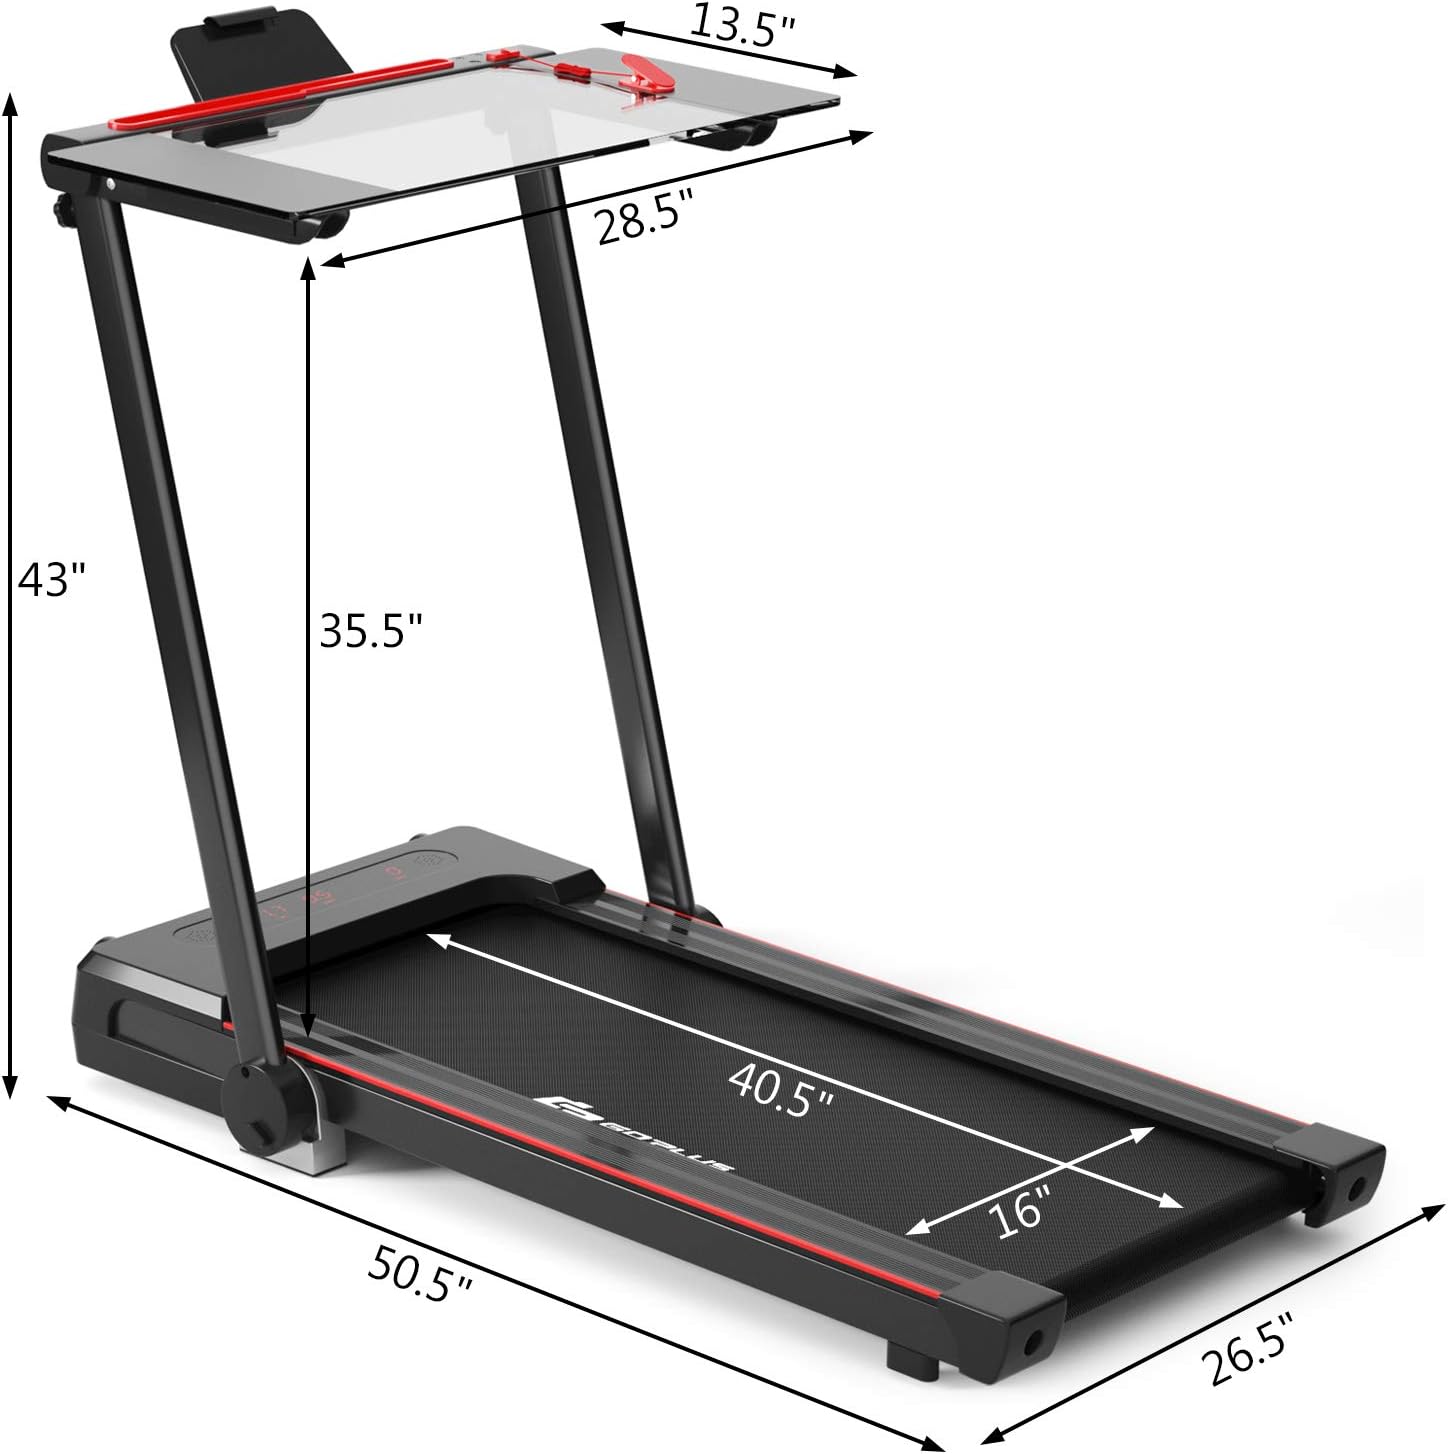 Goplus 3-in-1 Treadmill with Large Desk, 2.25HP Folding Electric Treadmill - $220